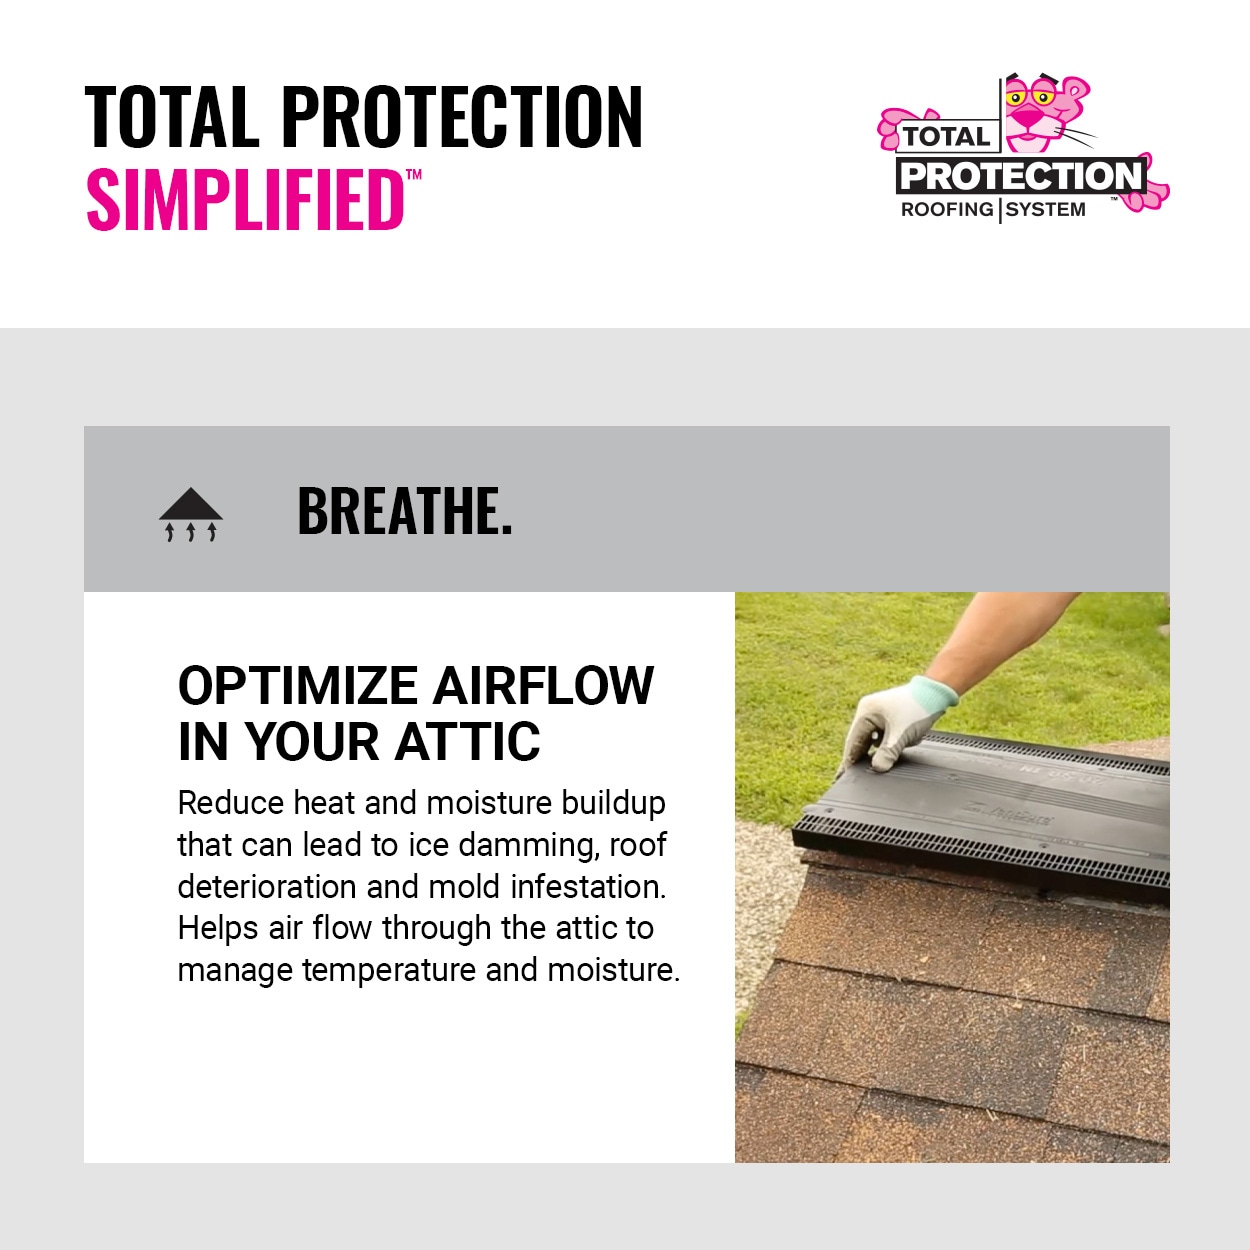 Owens Corning Owens Corning Total Protection Roofing System - The